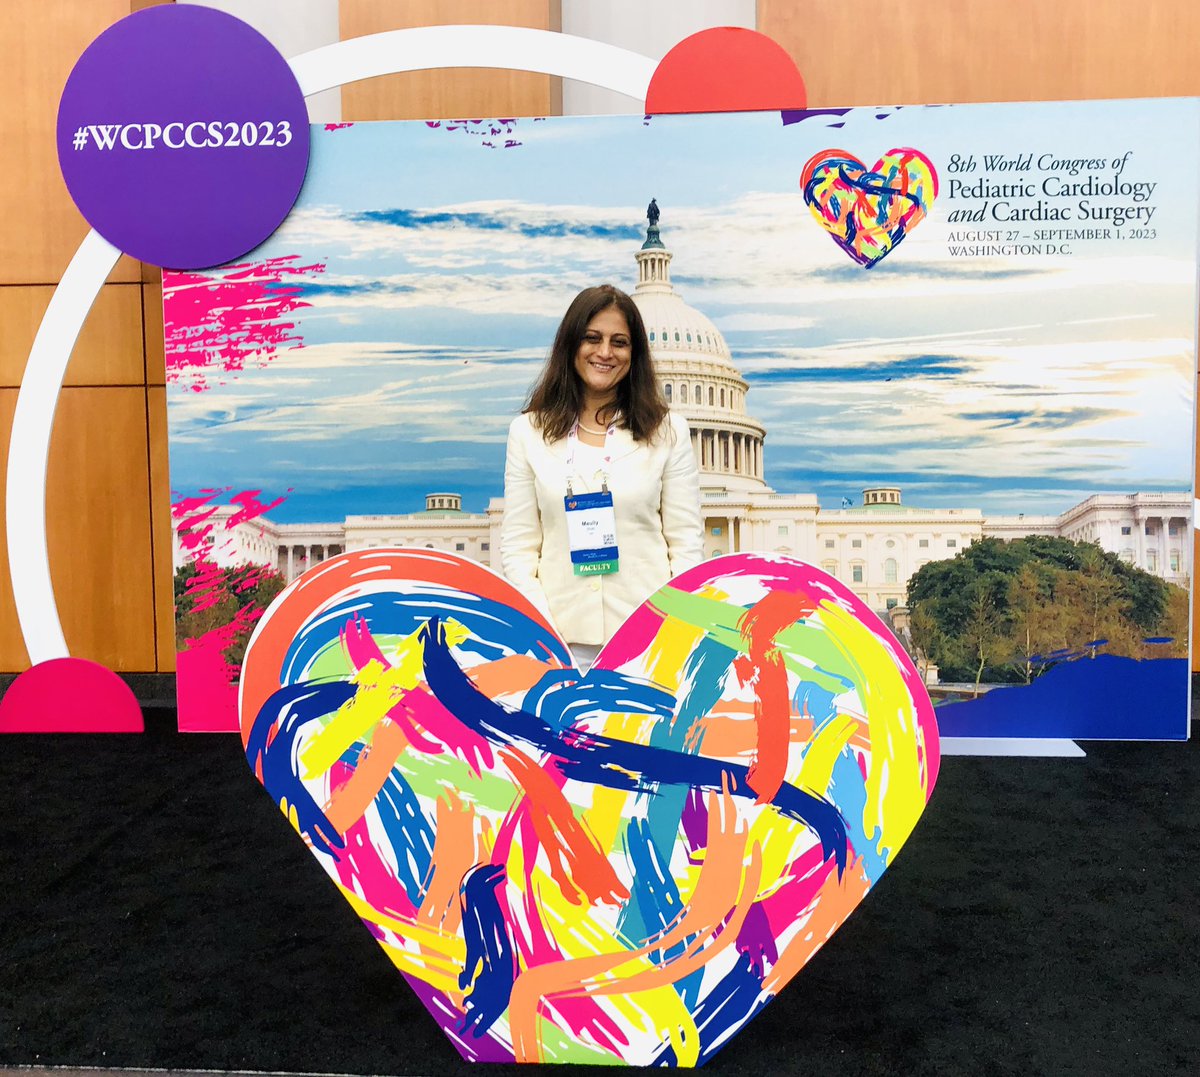 The Olympics of Pediatric Cardiology are in session in D.C. It is great to see so many old and new friends and learn about our field inside and outside the USA at #WCPCCS2023 . Honored to serve as faculty.